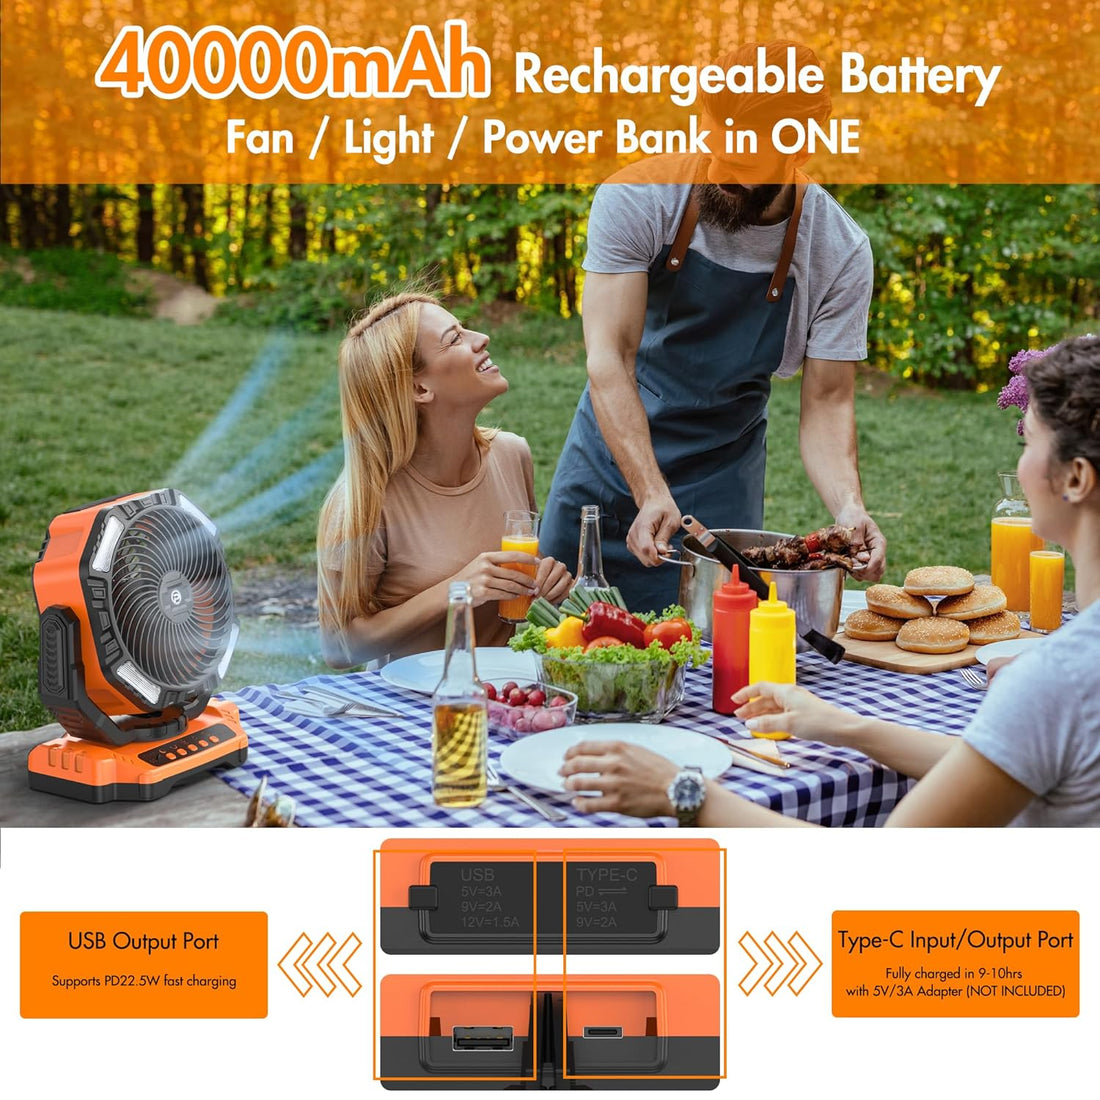 40000mAh Rechargeable Fan, Battery Operated Oscillating Outdoor Fan, Battery Powered Table Fan for Home Hurricane Jobsite Garage, Portable Tent Fan with Remote Light Hook for Camping Trip RV